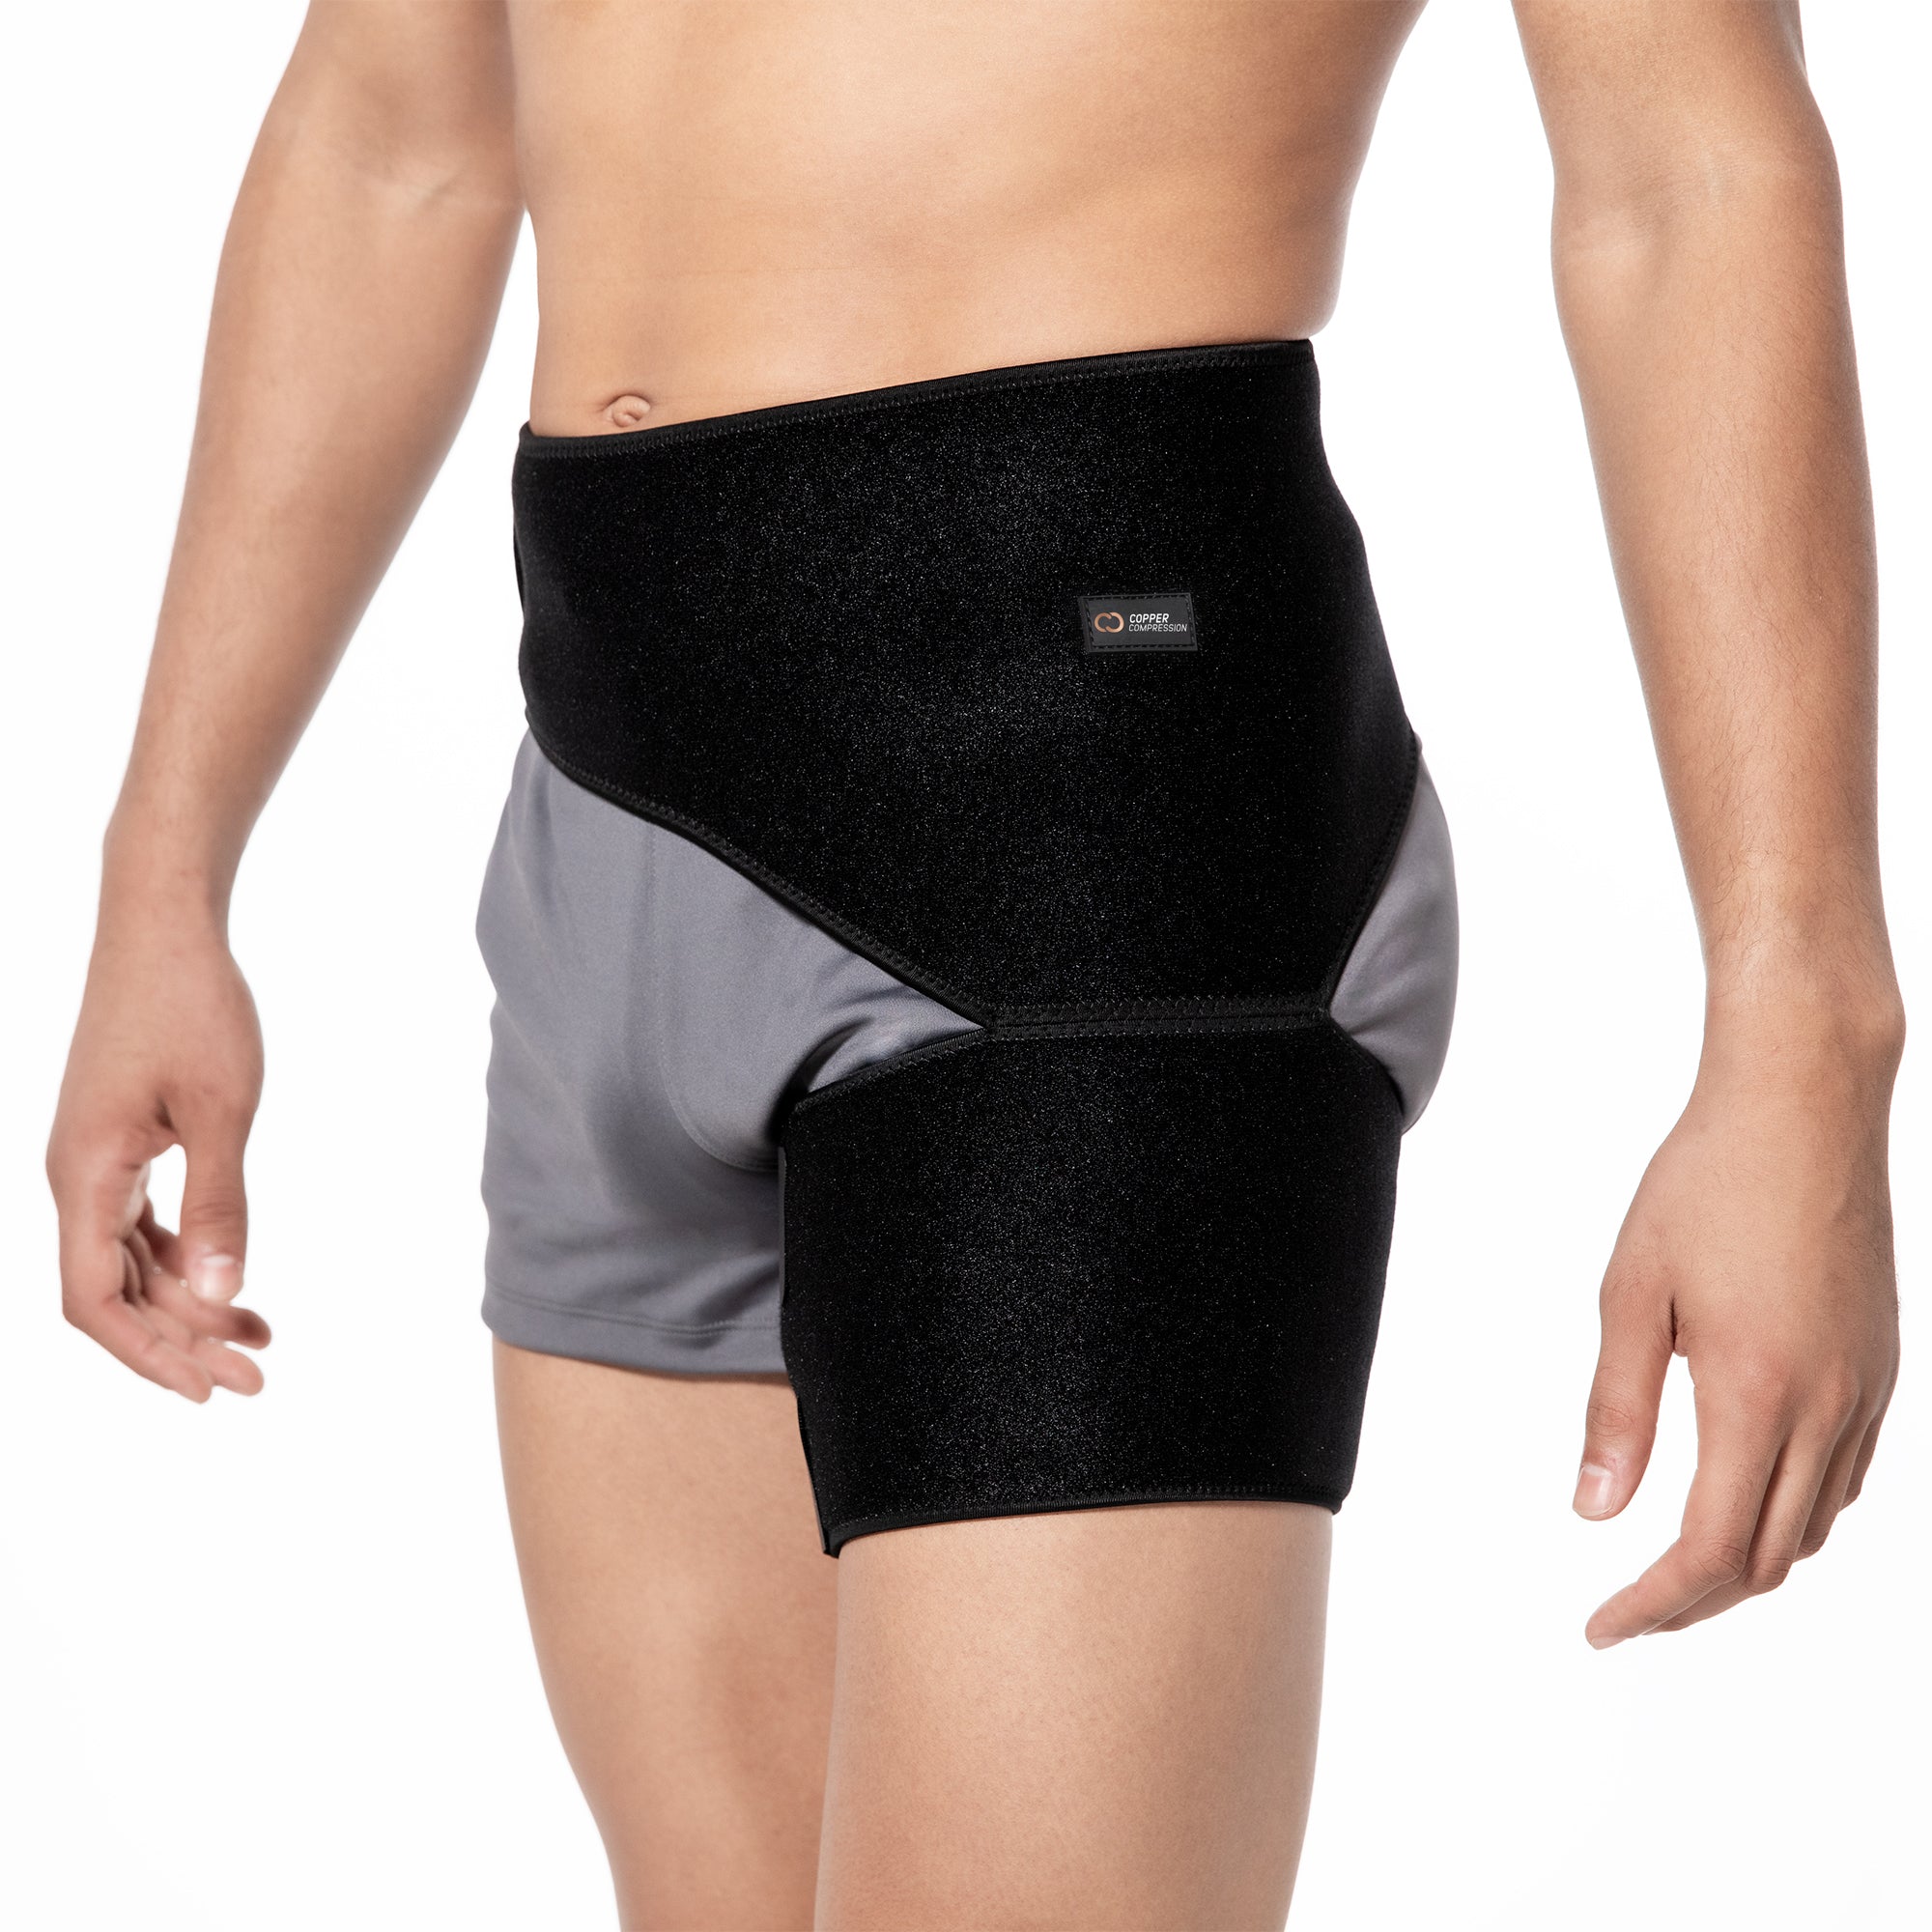 Hip, Thigh & Groin Supports